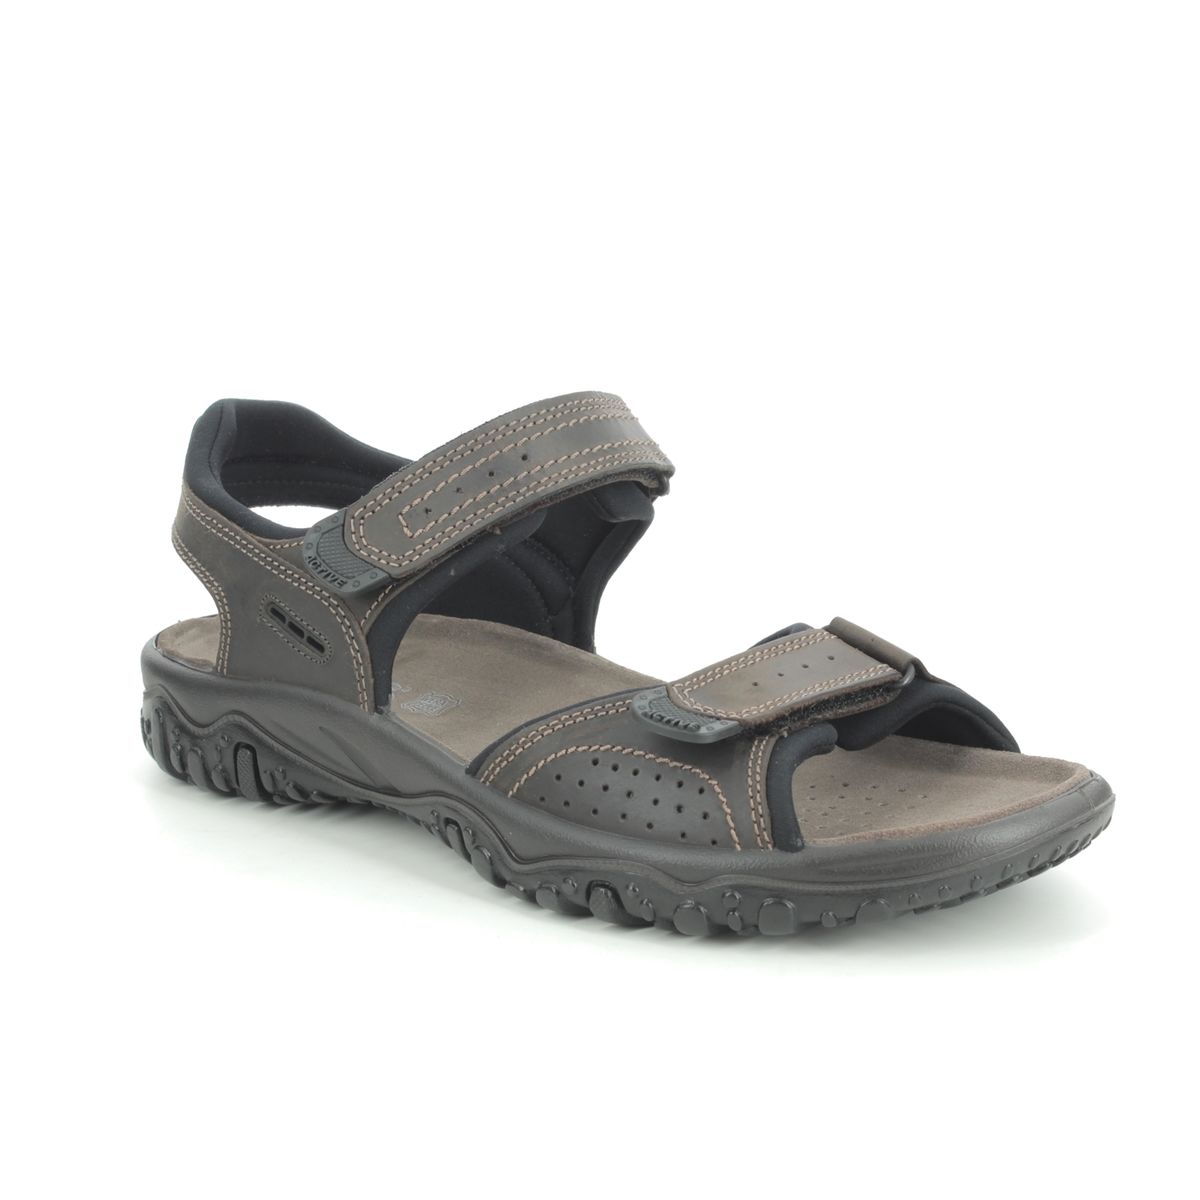 IMAC Pacifico Dark Brown Mens sandals 2910-3403011 in a Plain Leather in Size 46